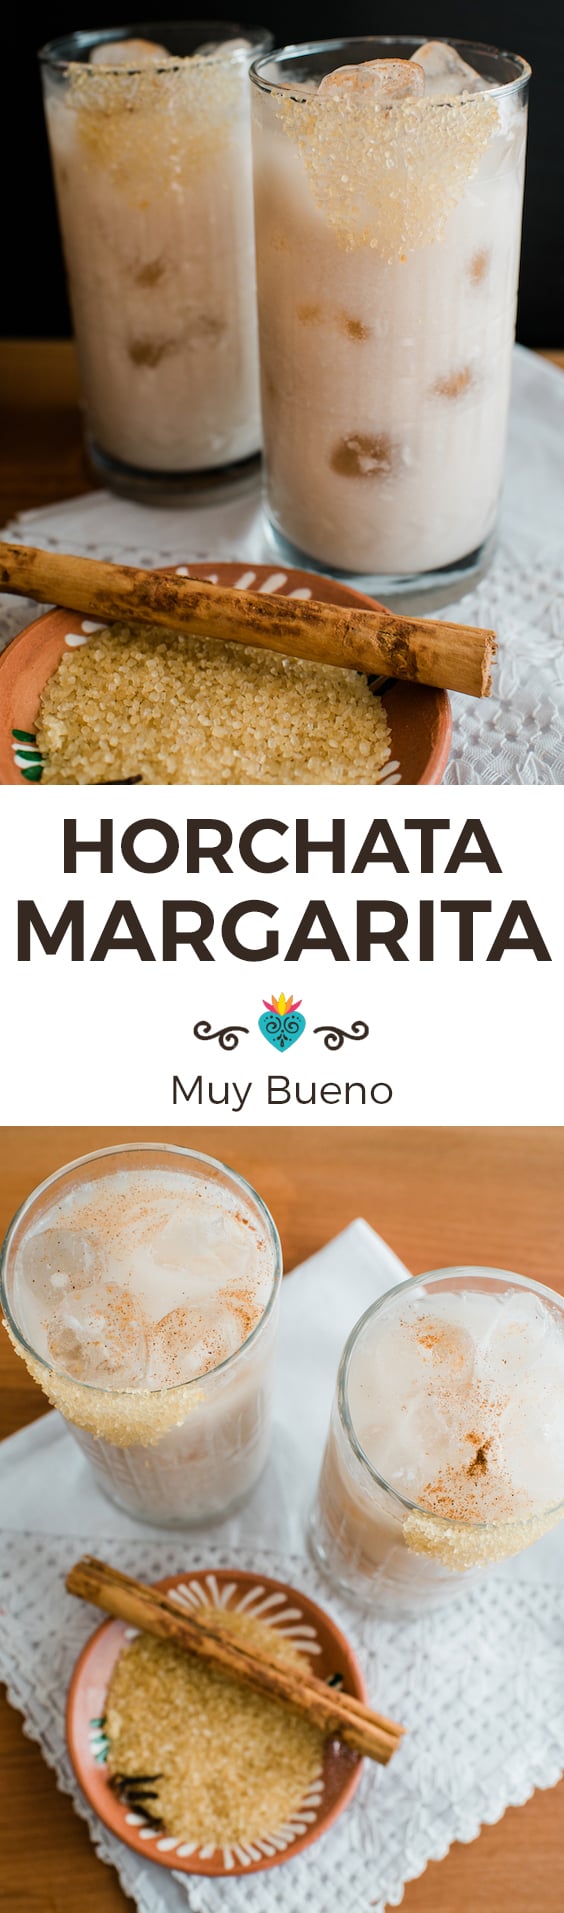 Horchata Magarita vertical collage with text overlay